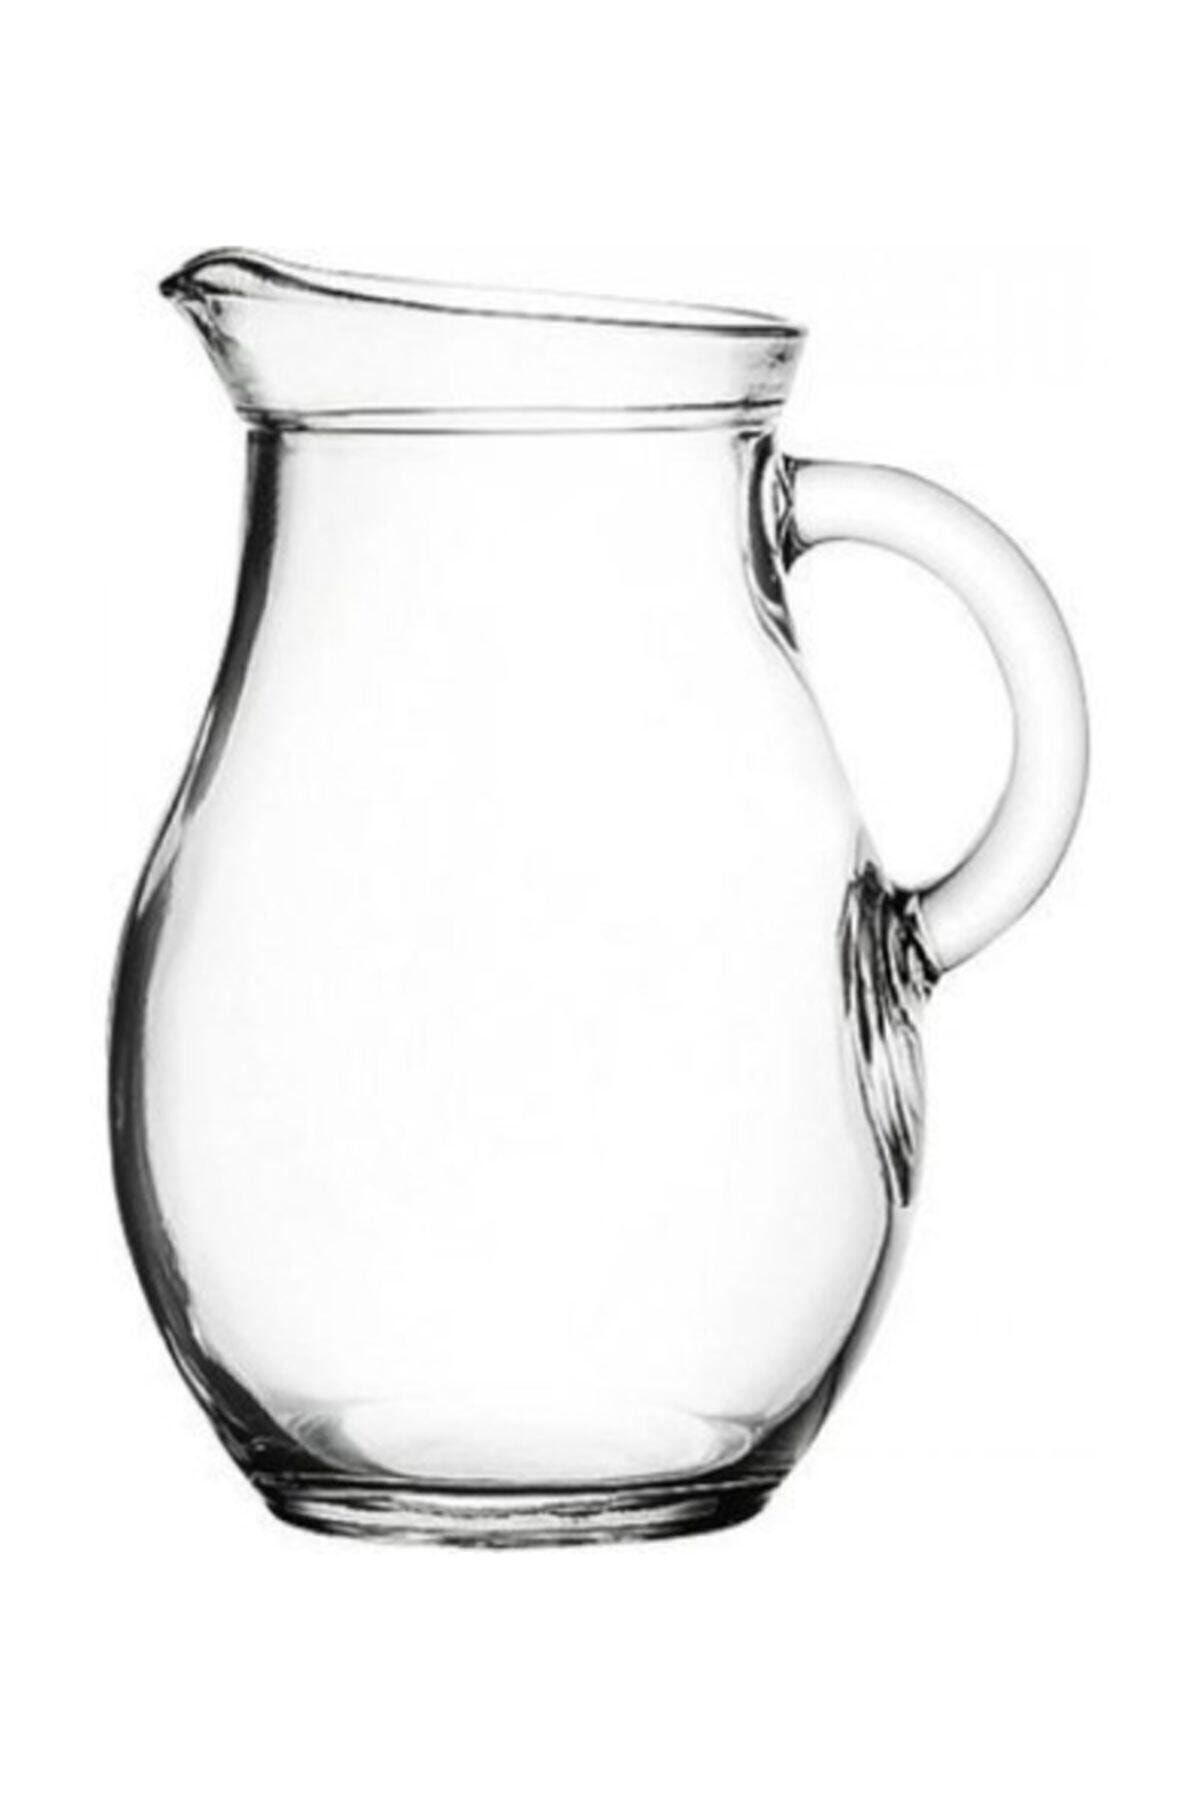 Istanbul - Small Pitcher